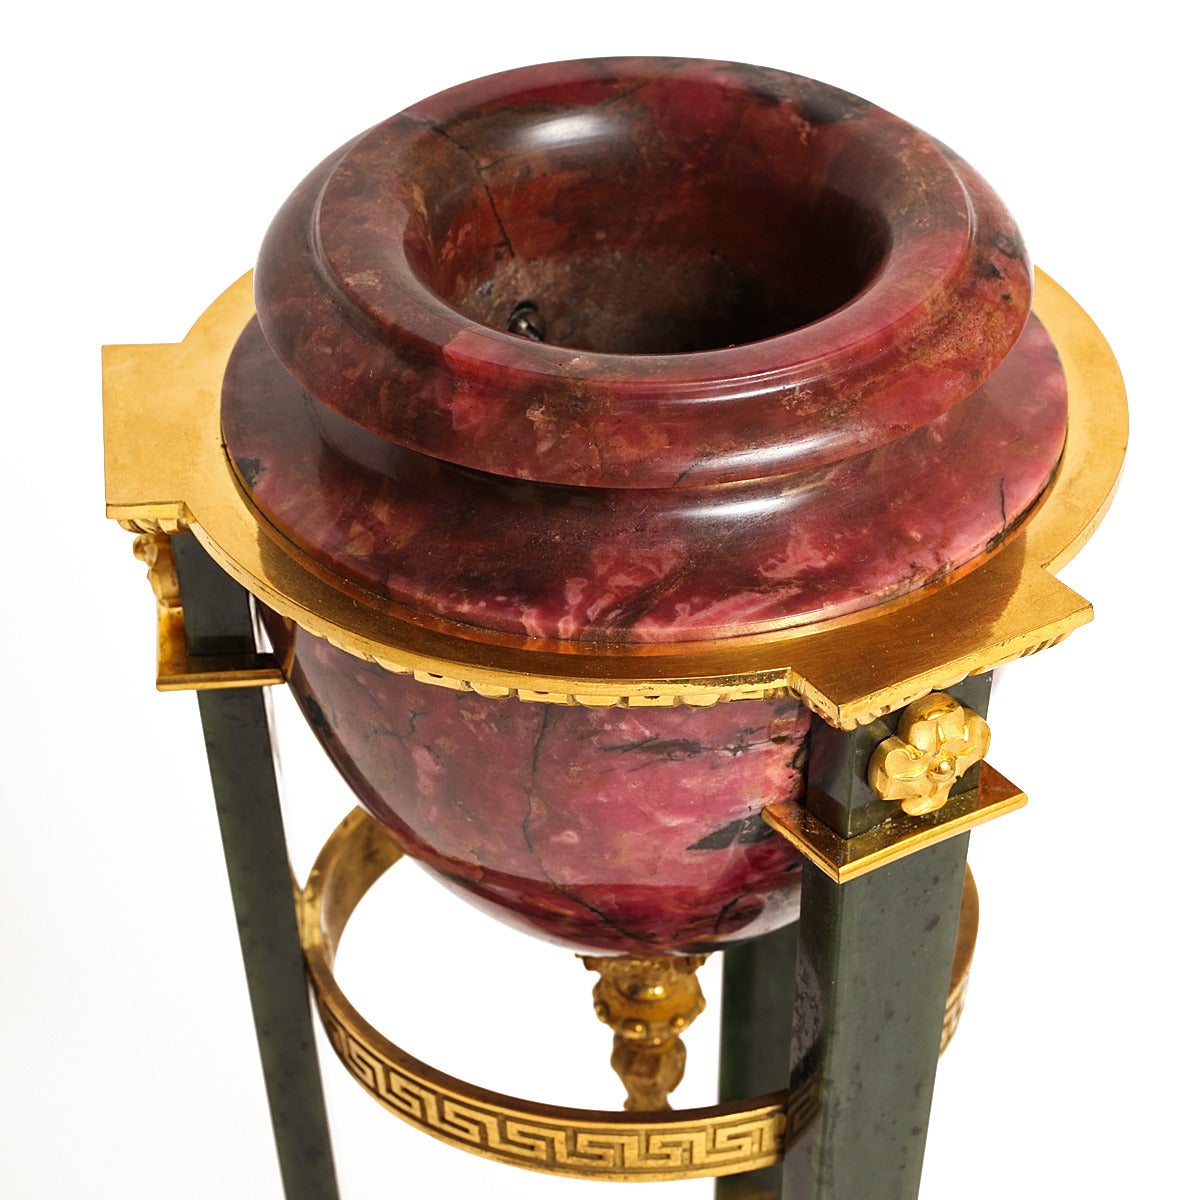 Brûle-parfum mounted in gilded bronze, the circular rhodonite top and base joined by tapering rectangular nephrite legs. After a design by I.I. Galberg (1779-1863), a Swedish architect and designer, architect from 1817 to the Cabinet of his